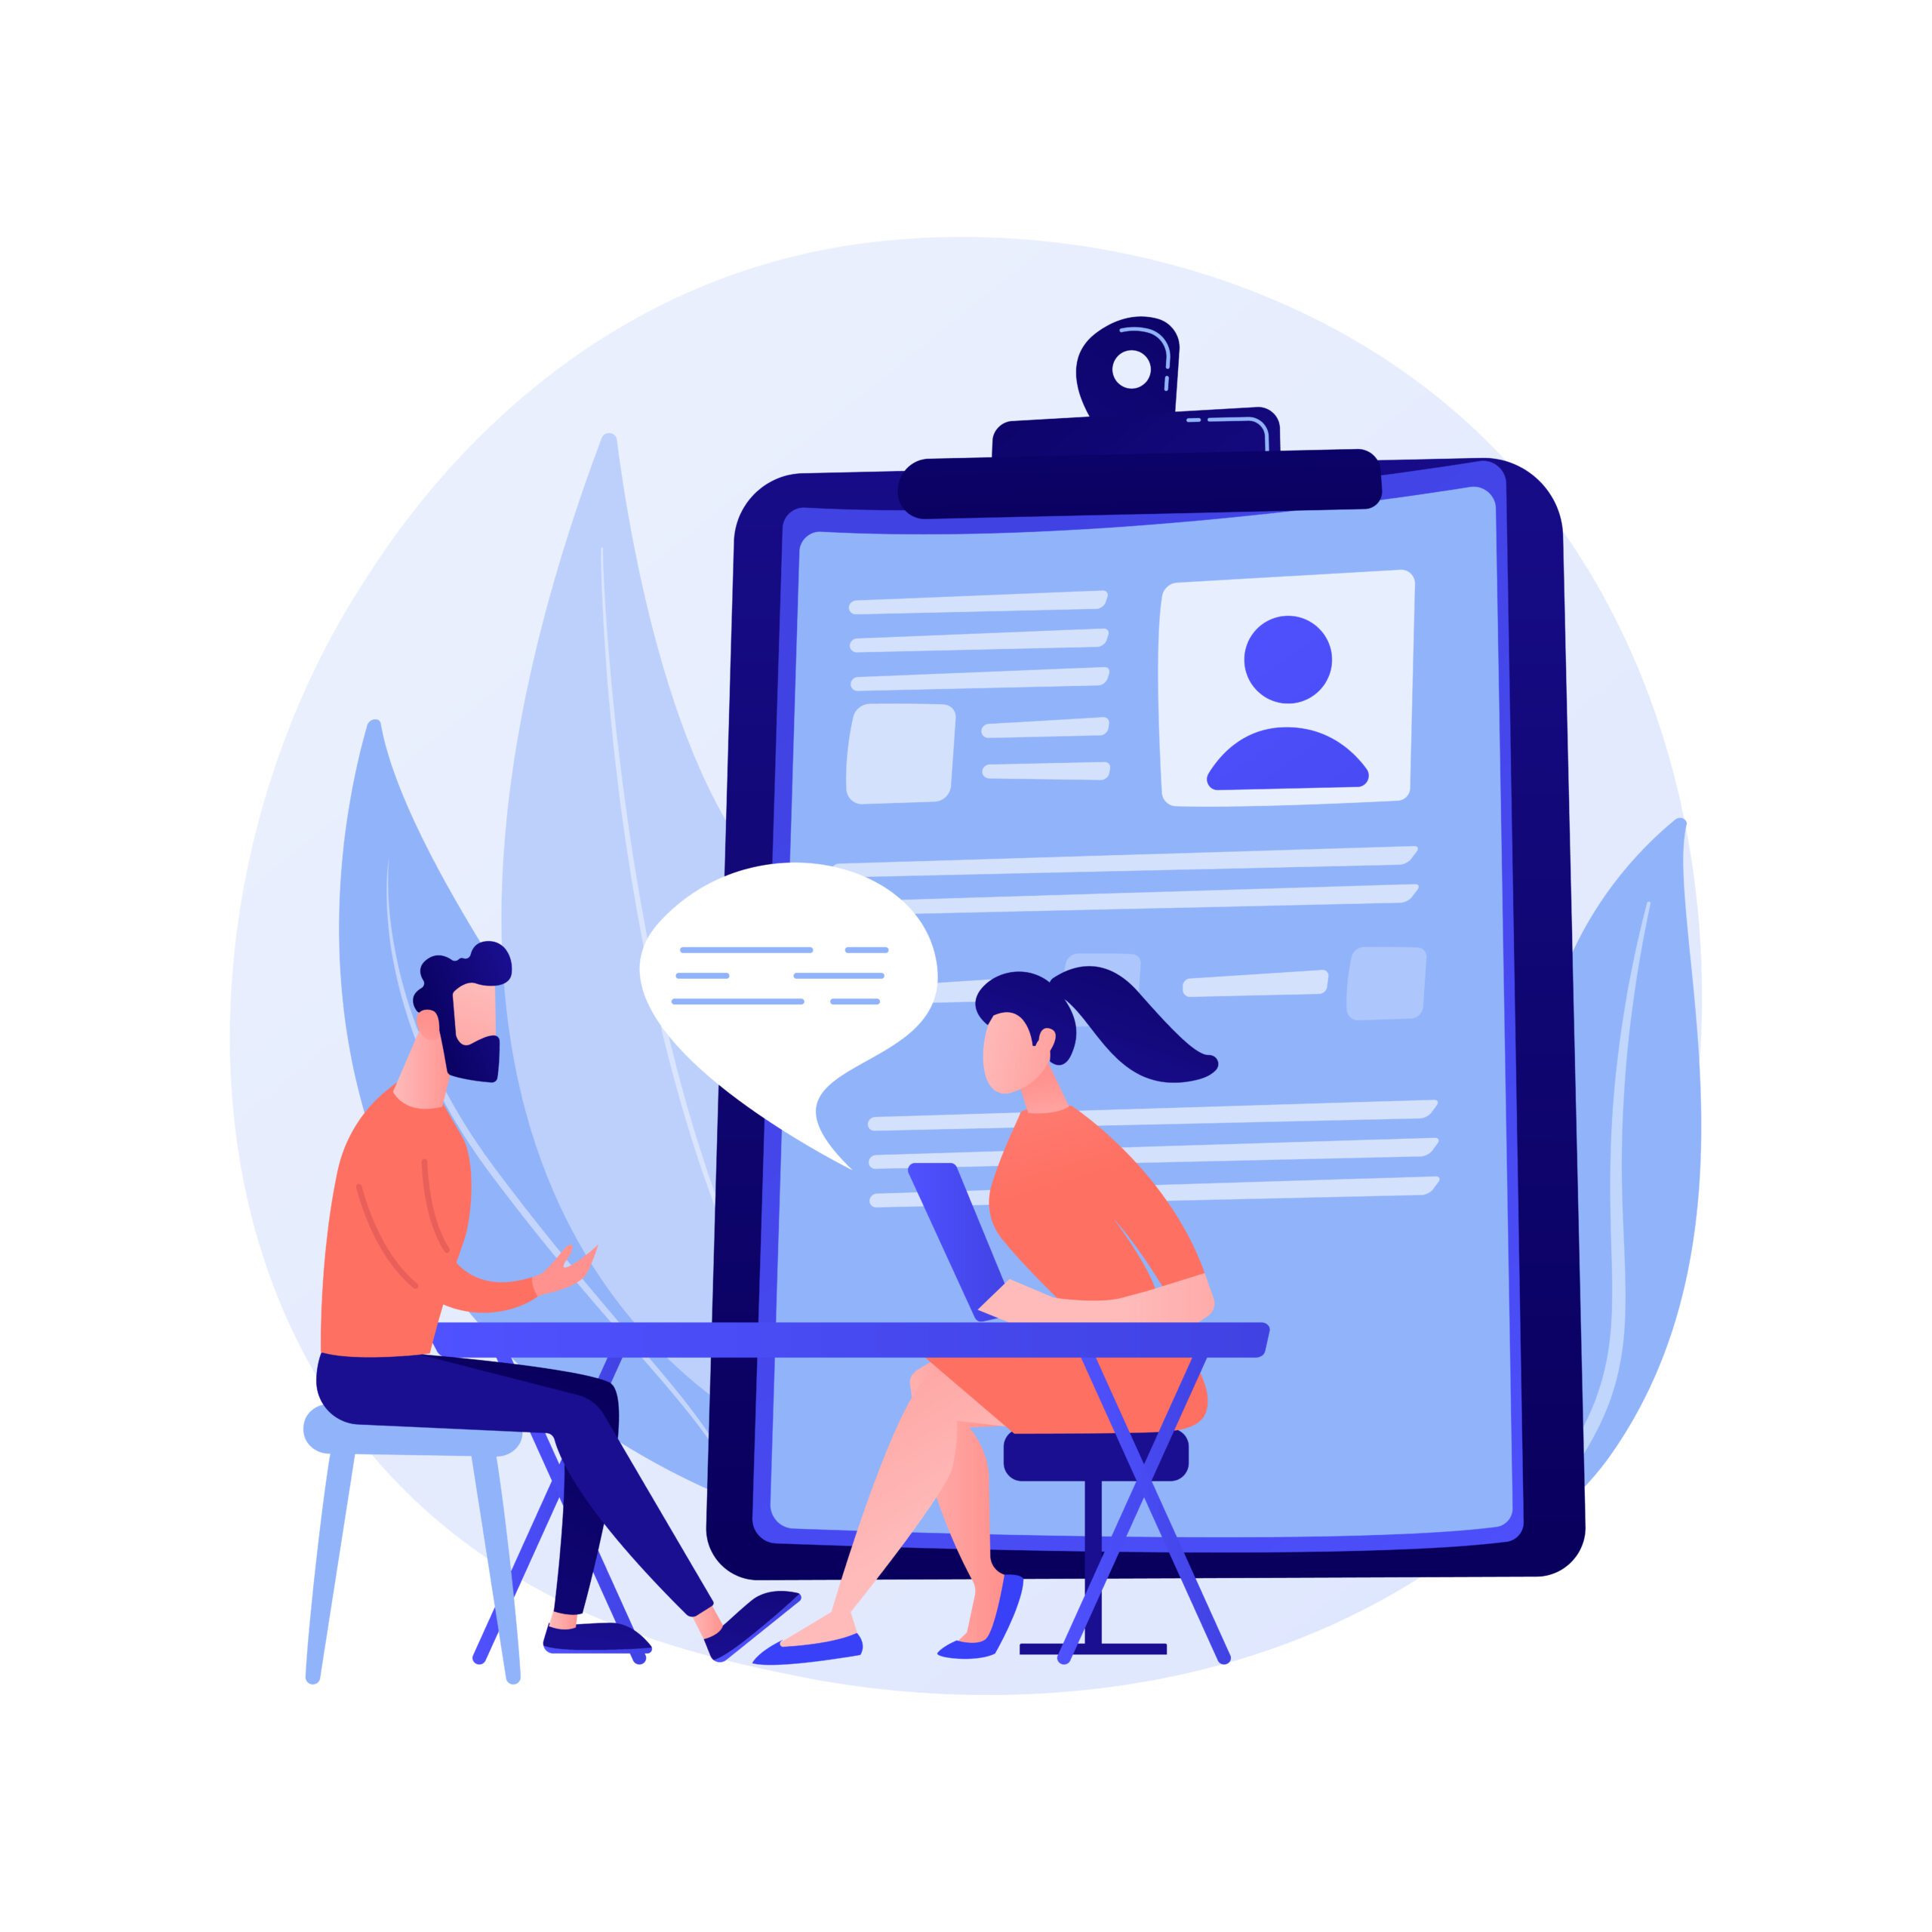 Job interview process. Hiring new employees. HR specialist cartoon character talking to new candidatee. Recruitment, employment, headhunting. Vector isolated concept metaphor illustration